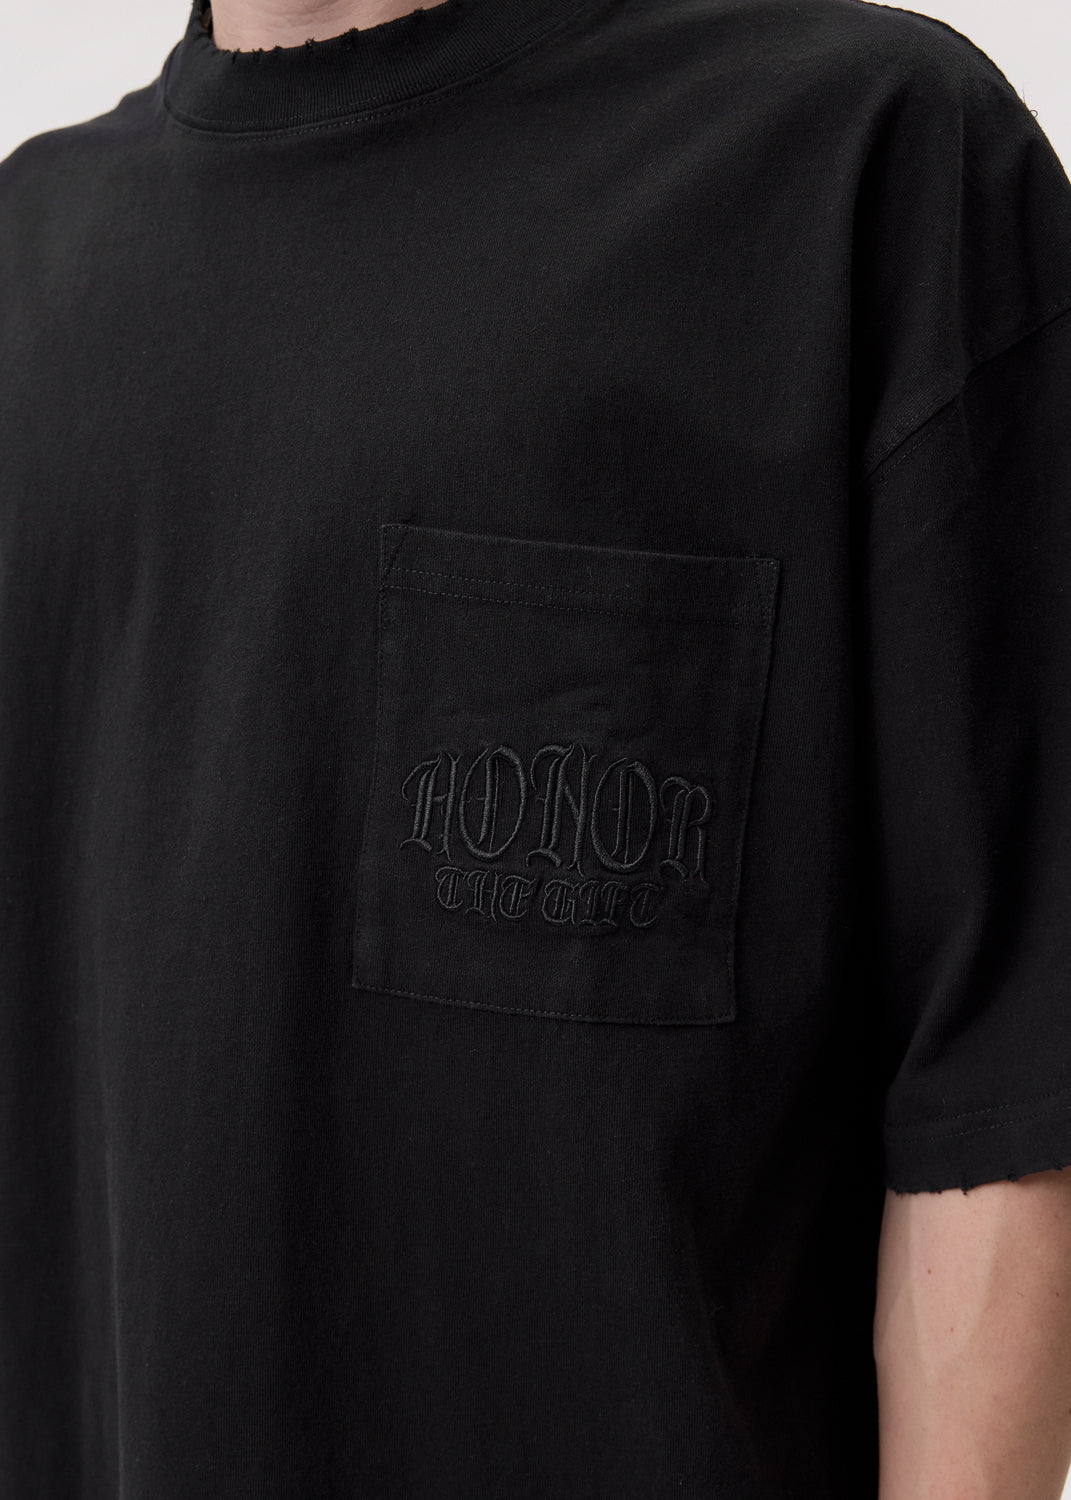 Honor the Gift - Black Embroidered Pocket T-Shirt | 1032 SPACE